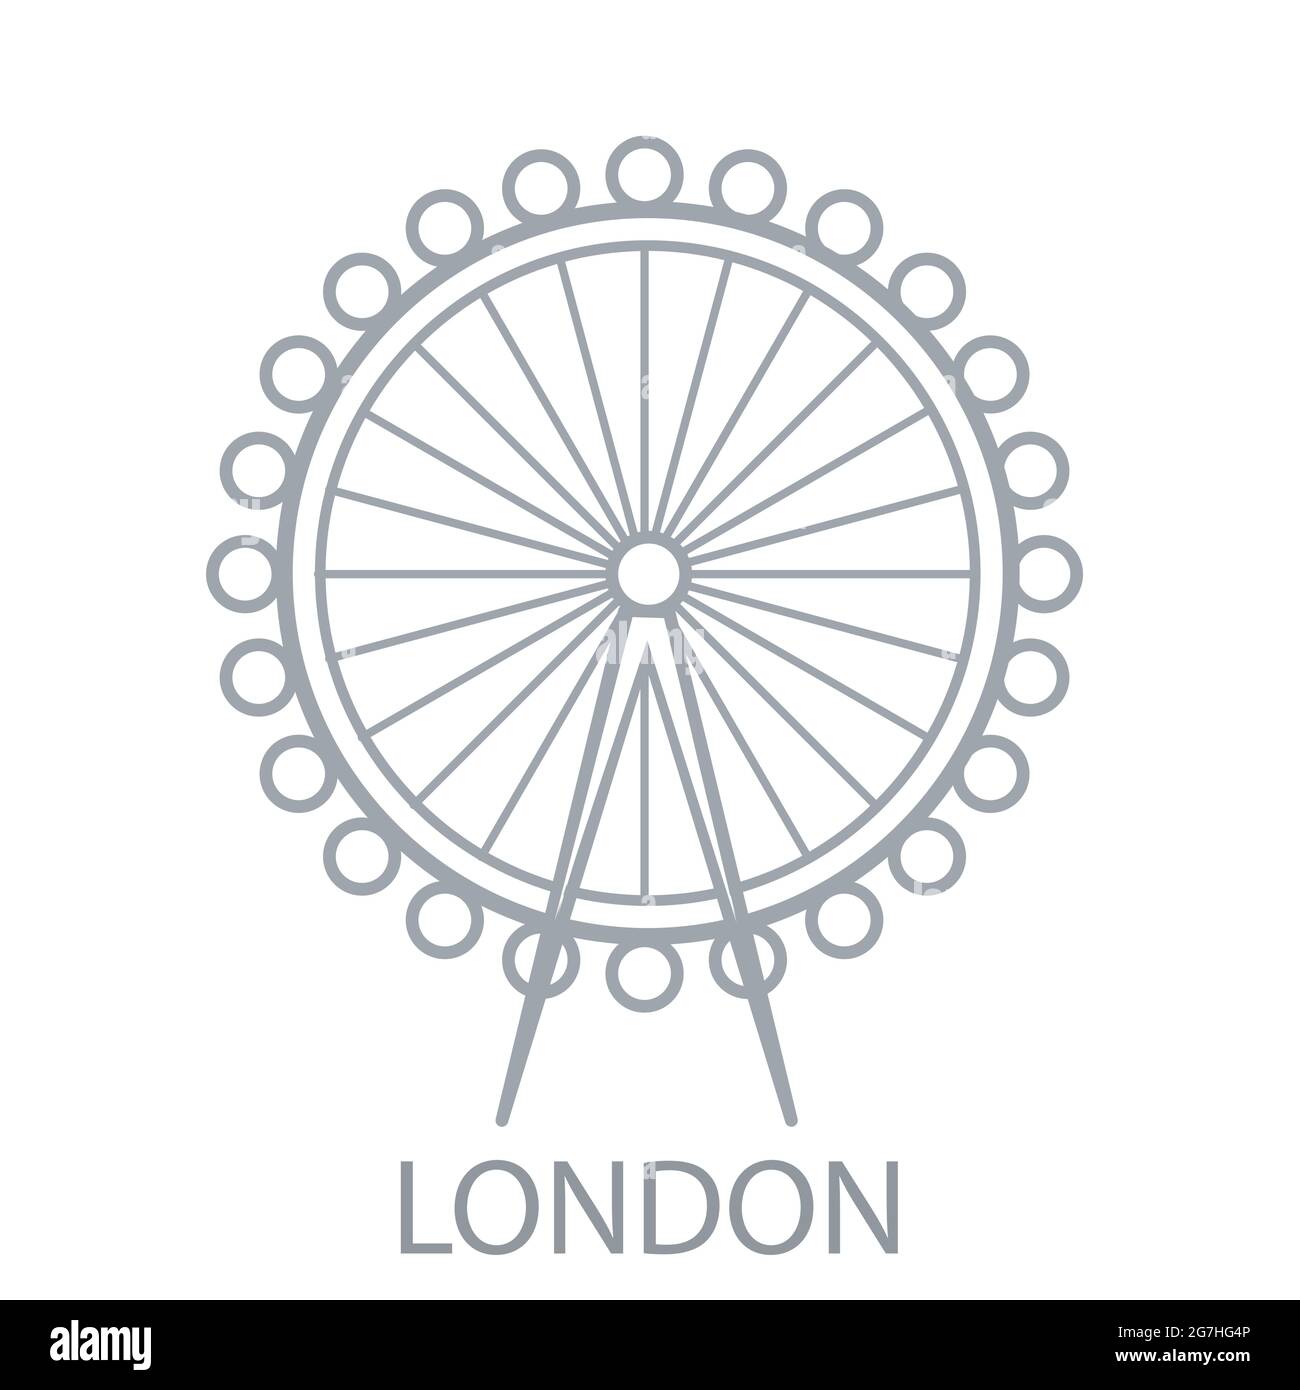 London skyline historical significance tourist attraction Stock Vector